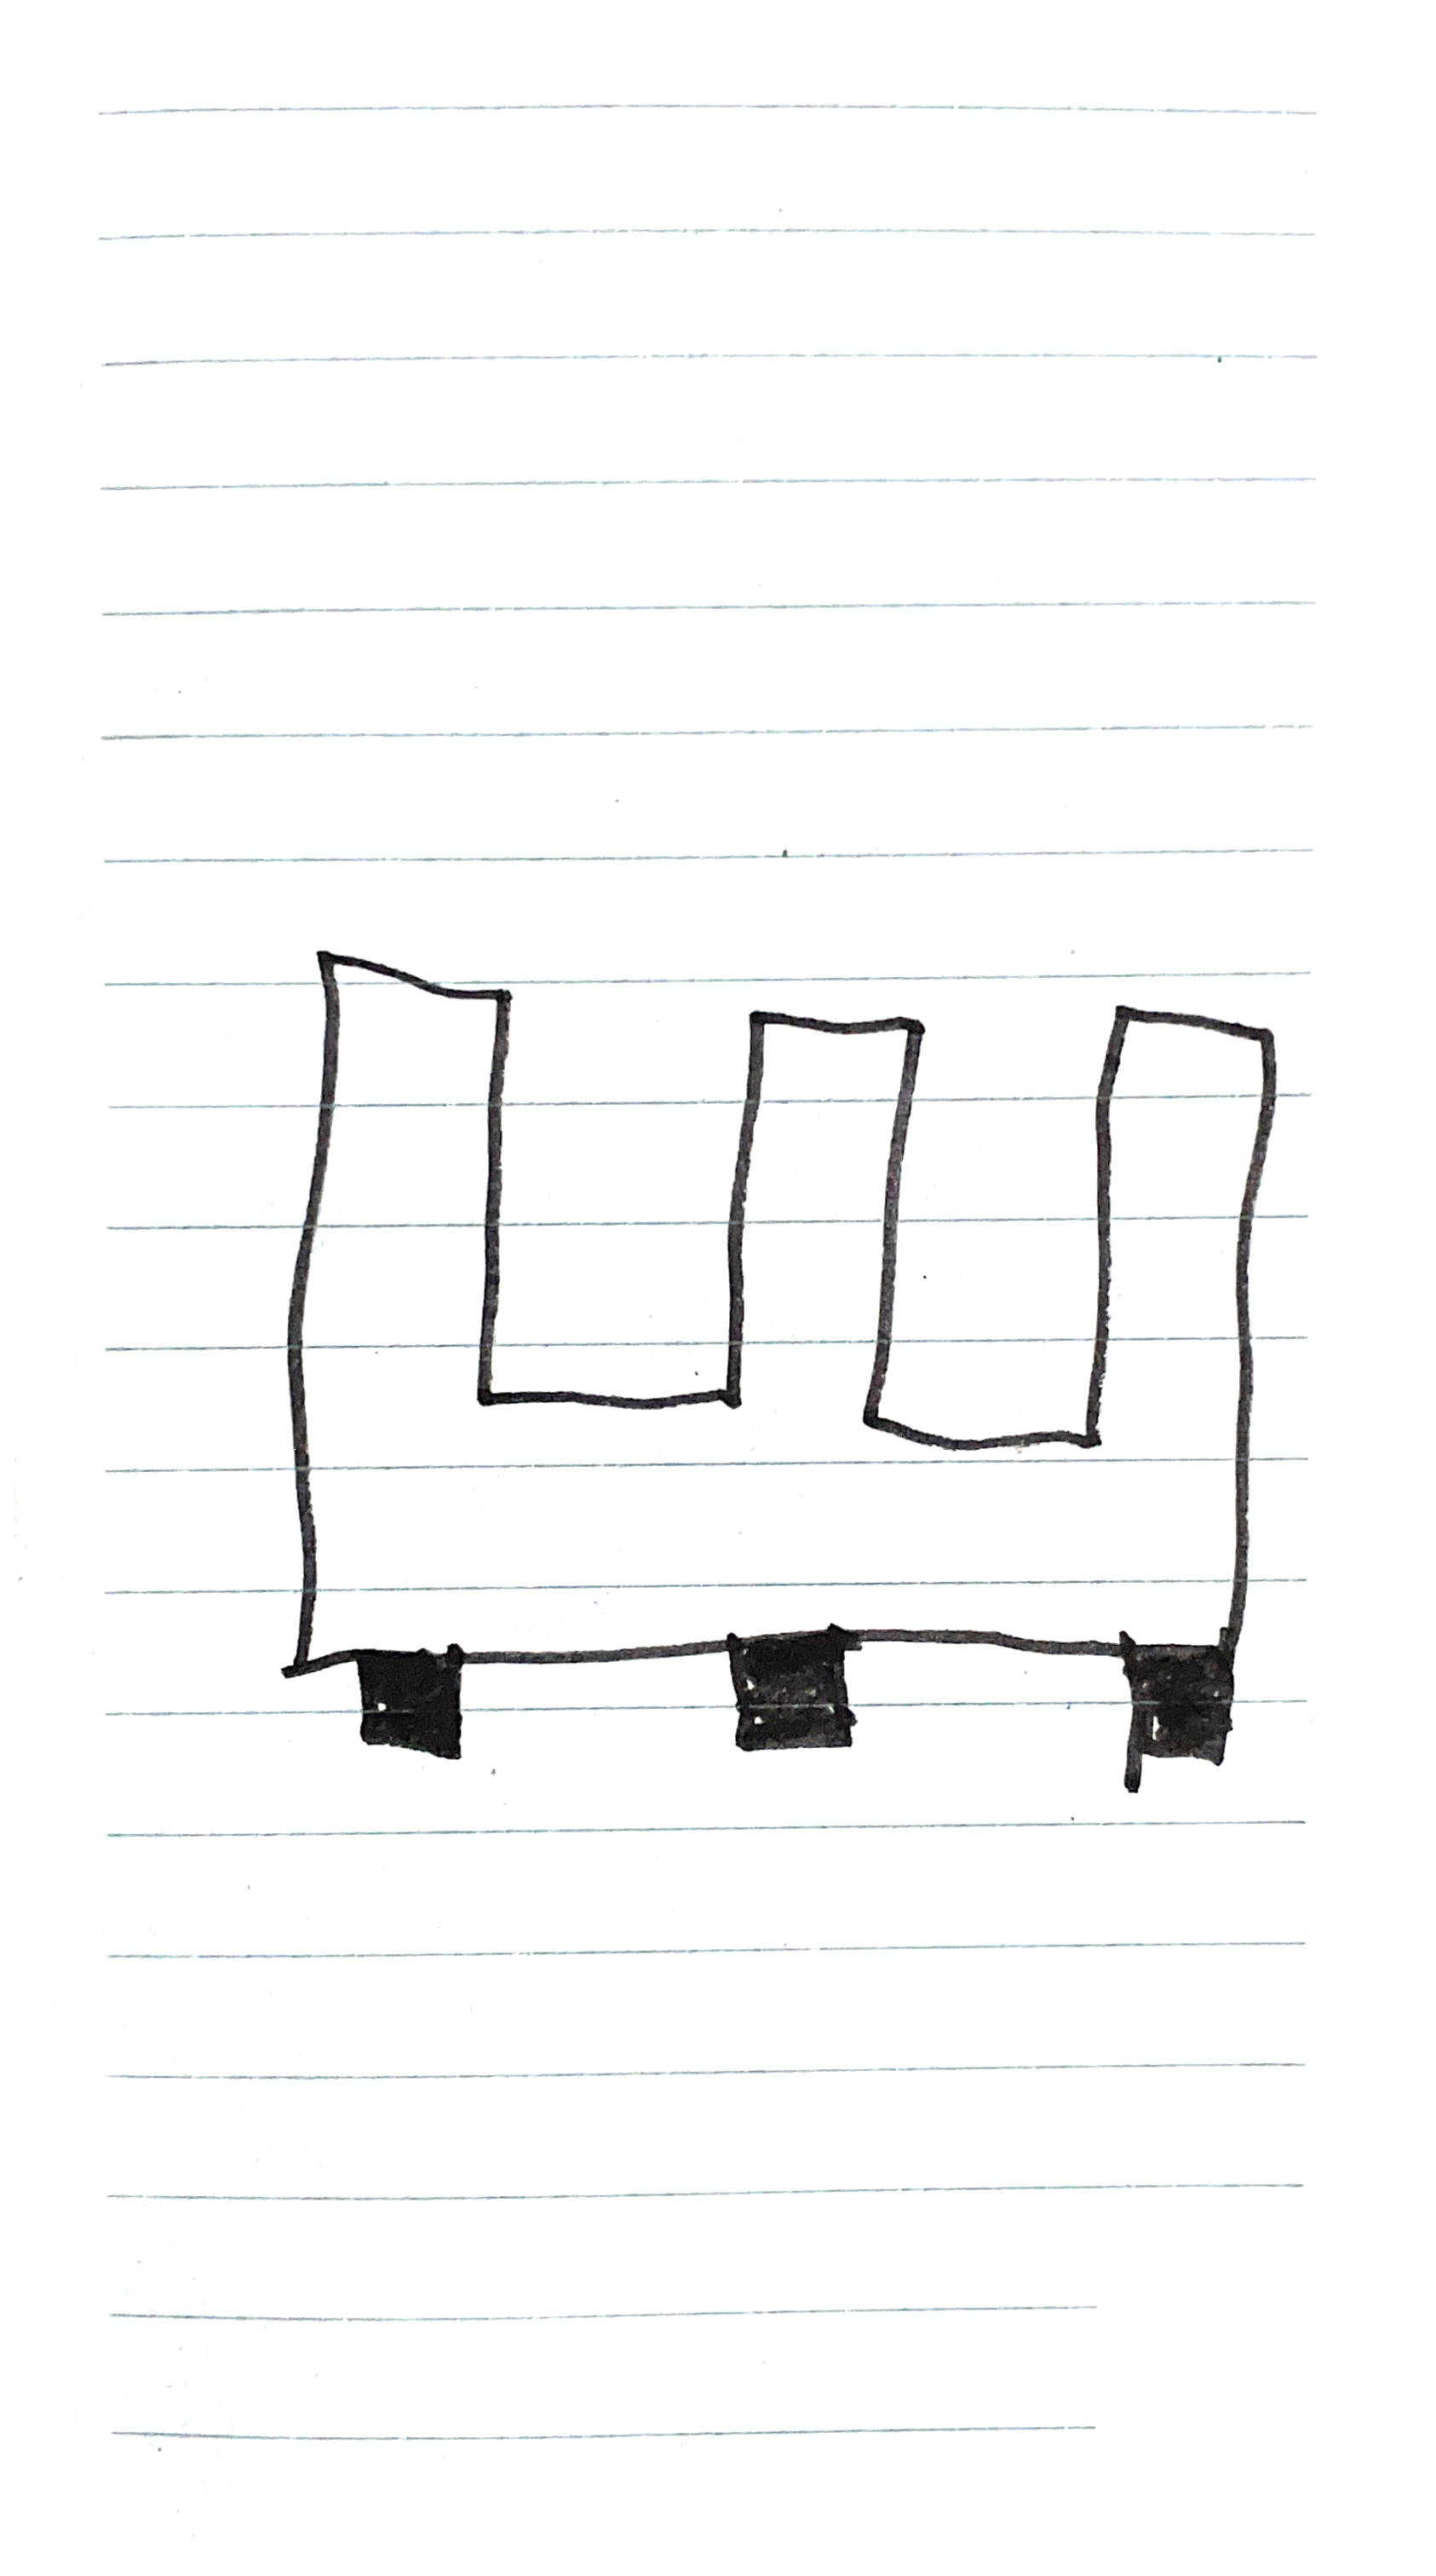 pen drawing of an 'E' upside down with three black squares supporting it